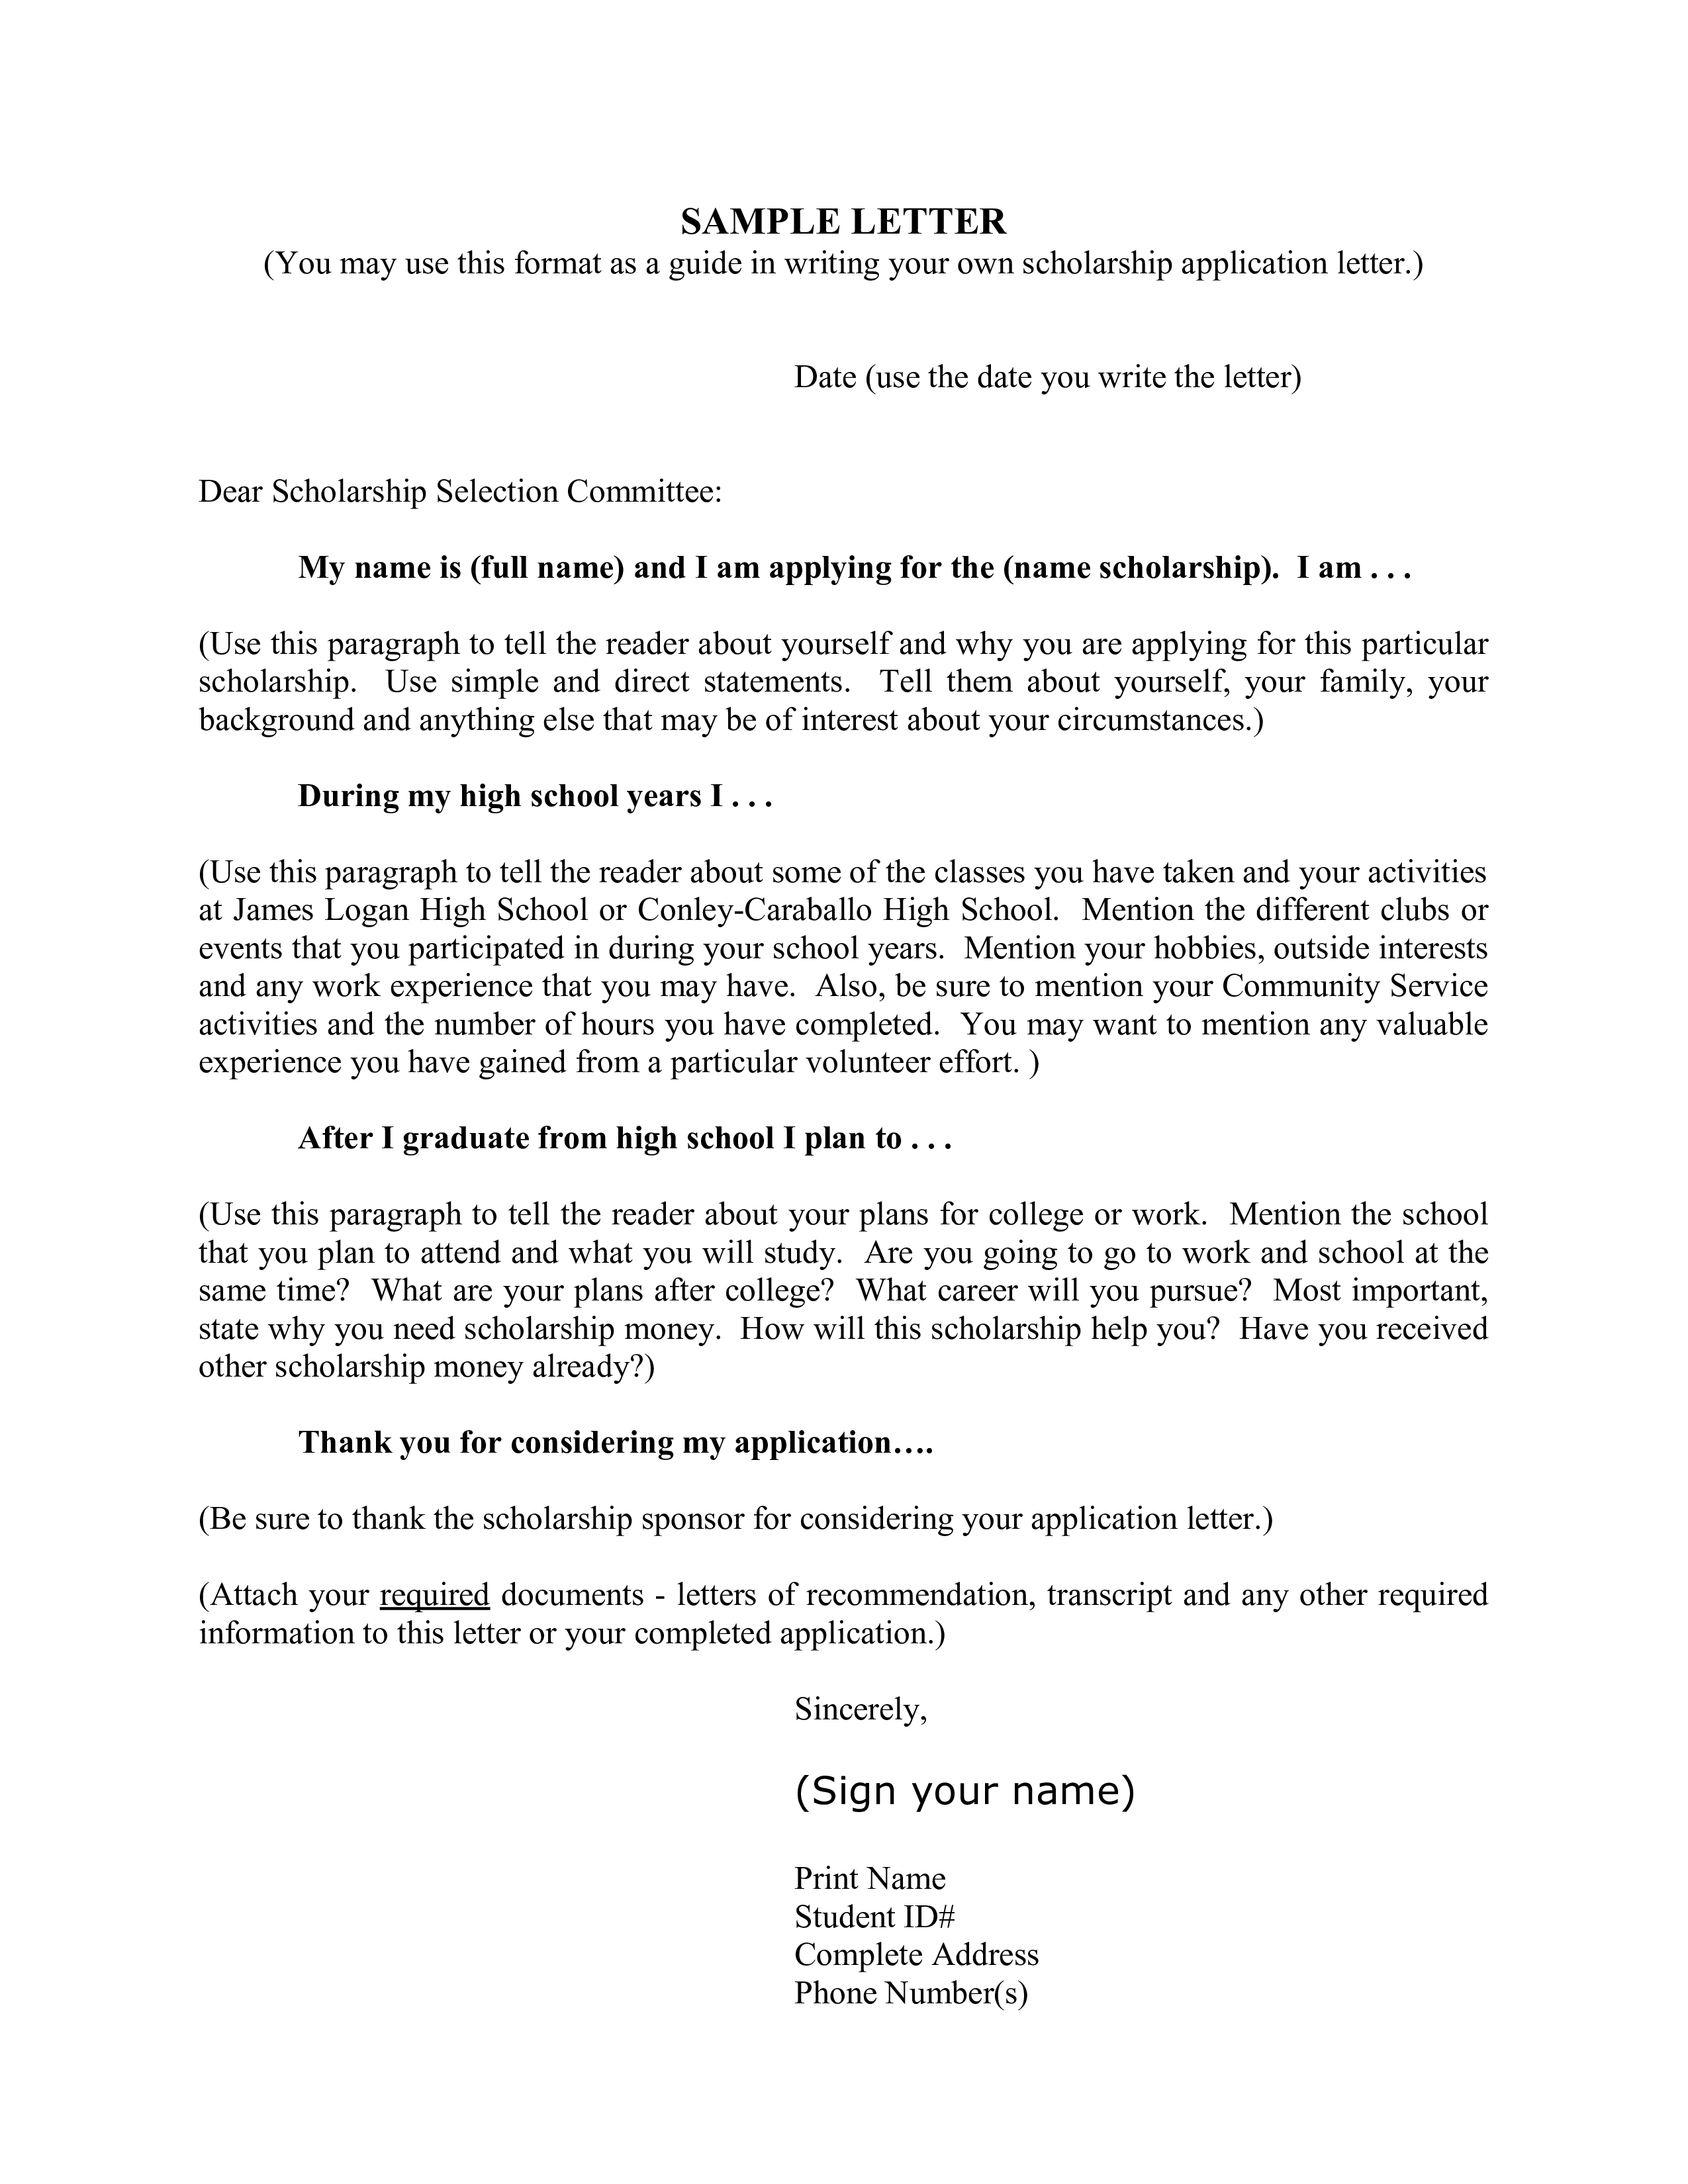 a scholarship application letter